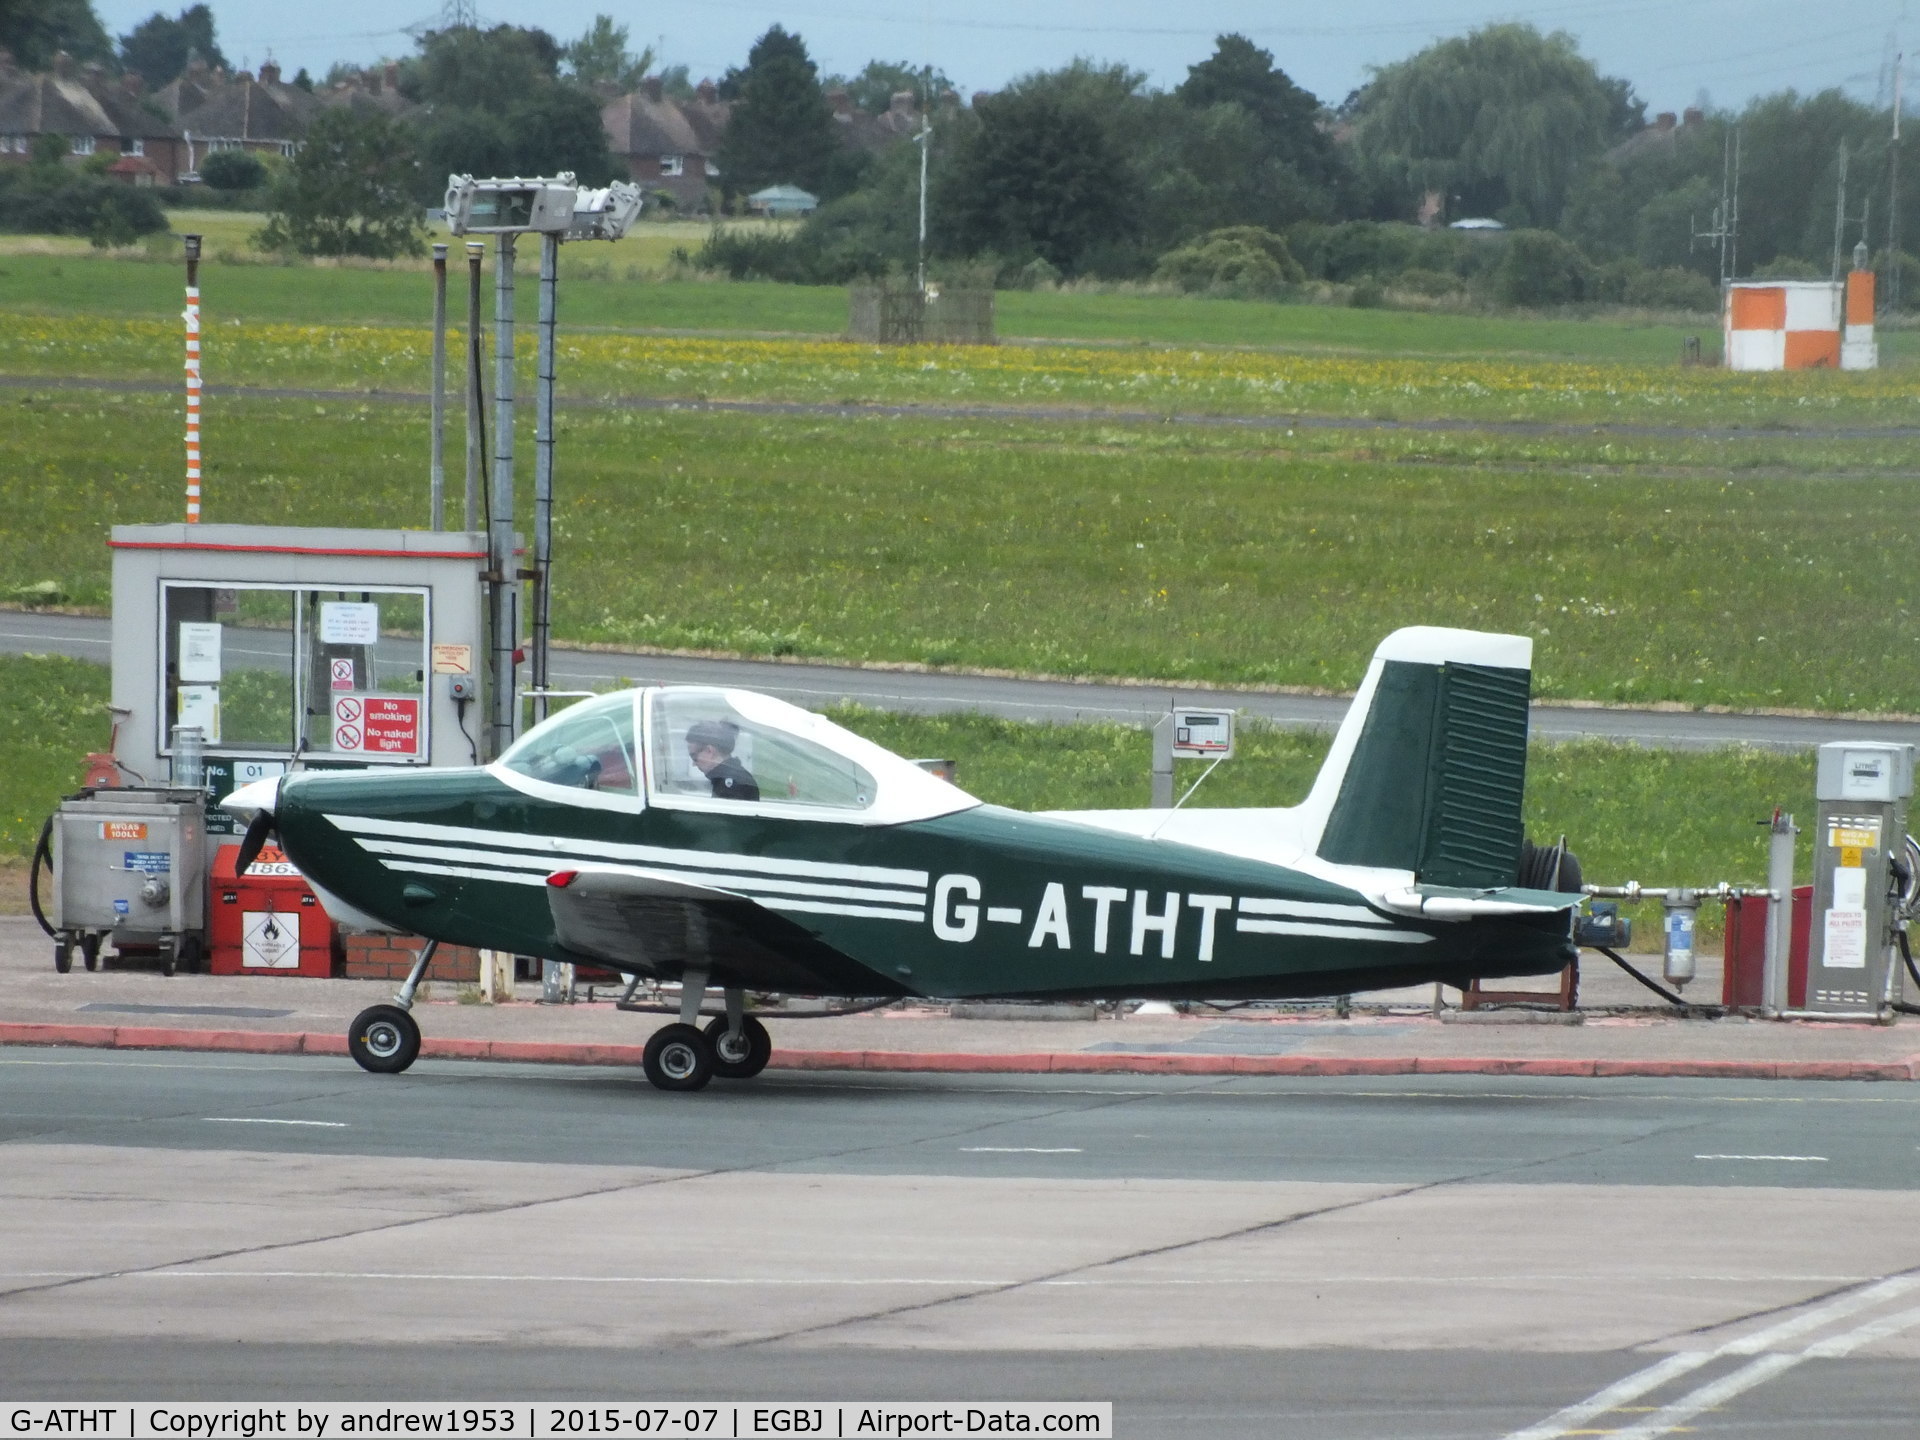 G-ATHT, 1965 Victa Airtourer 115 C/N 120, G-ATHT at Gloucestershire Airport.